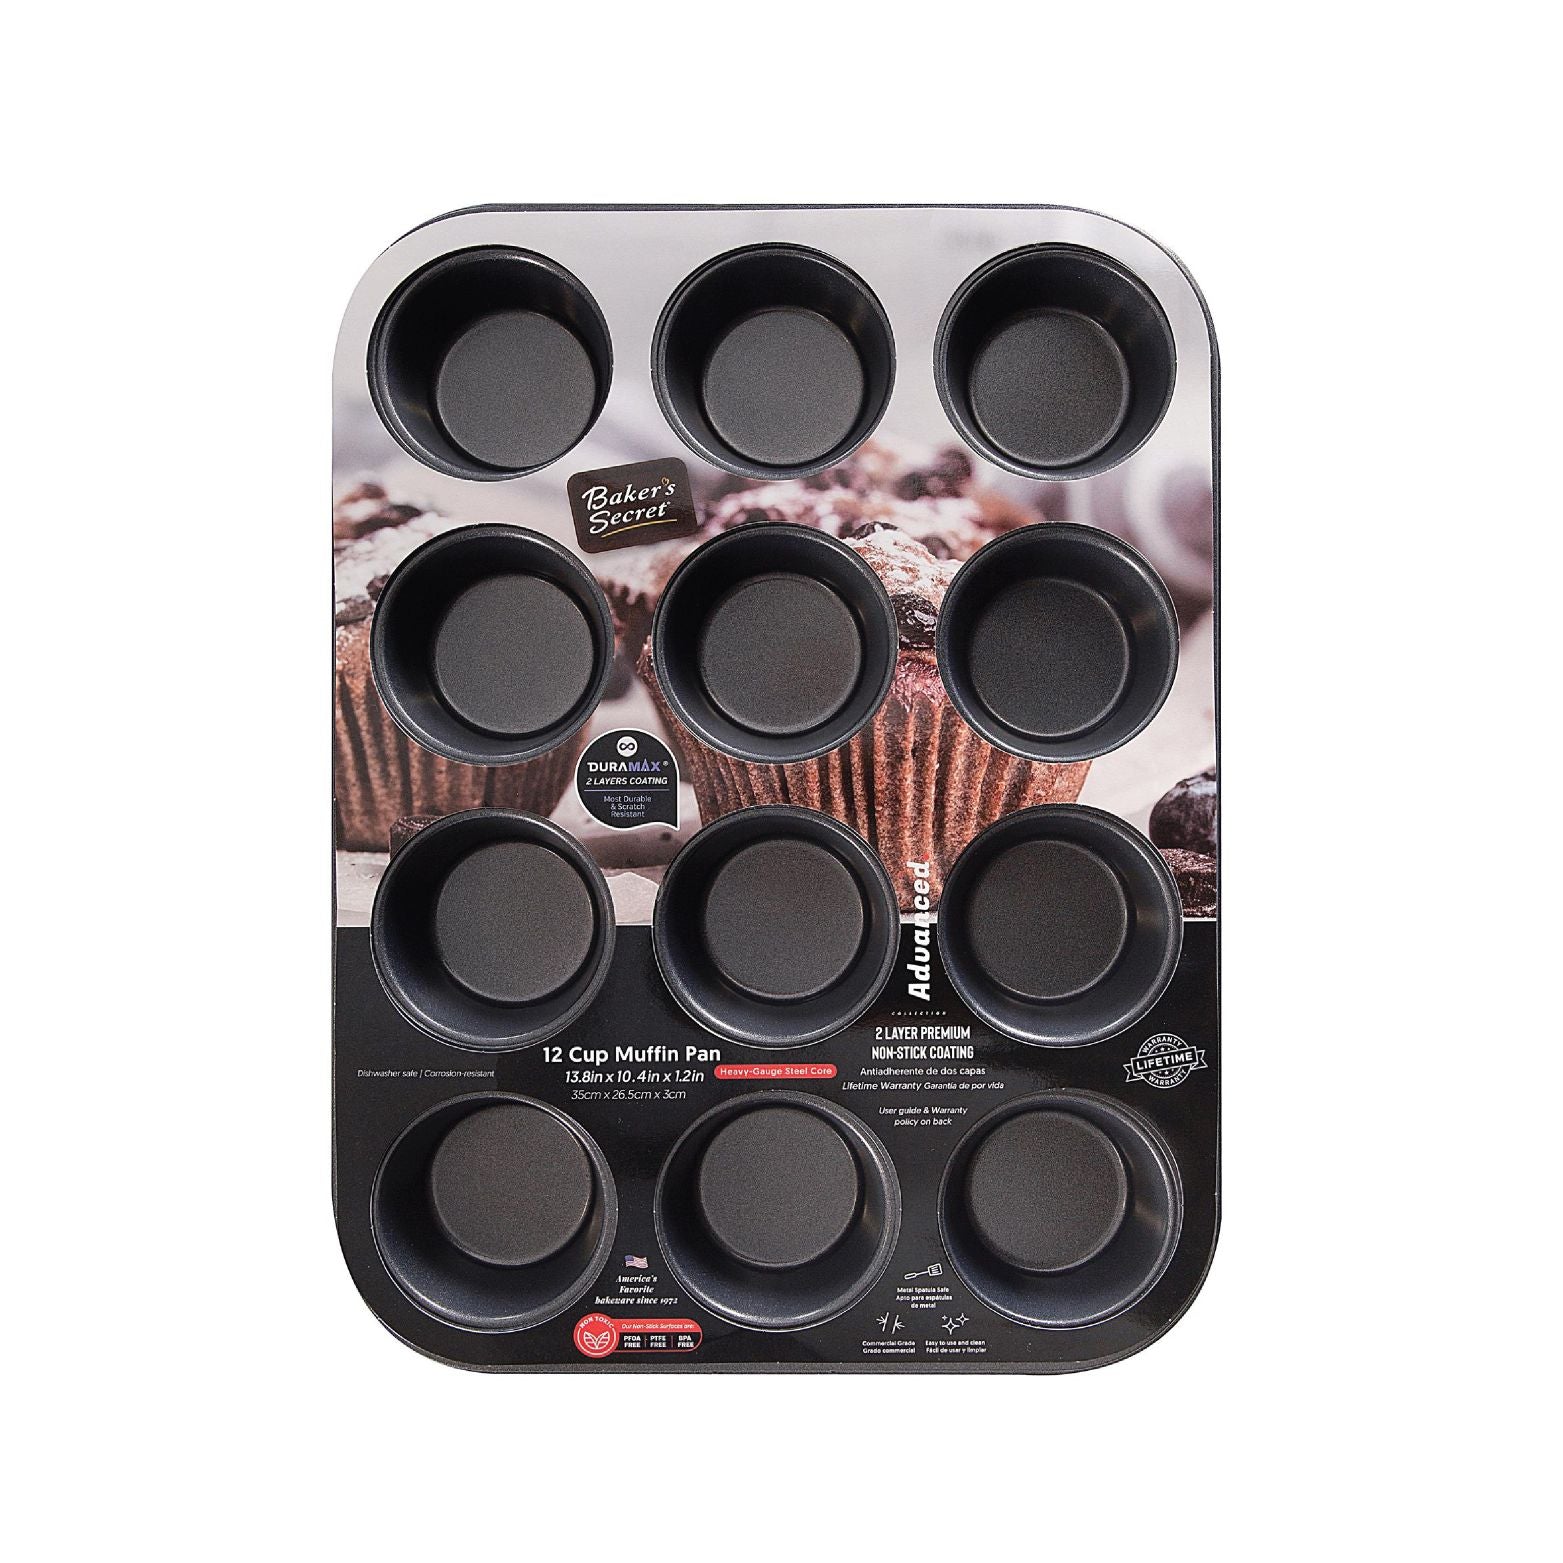 12 Cups Muffin Pan 12cup Muffin & Pastry Pans - Baker's Secret